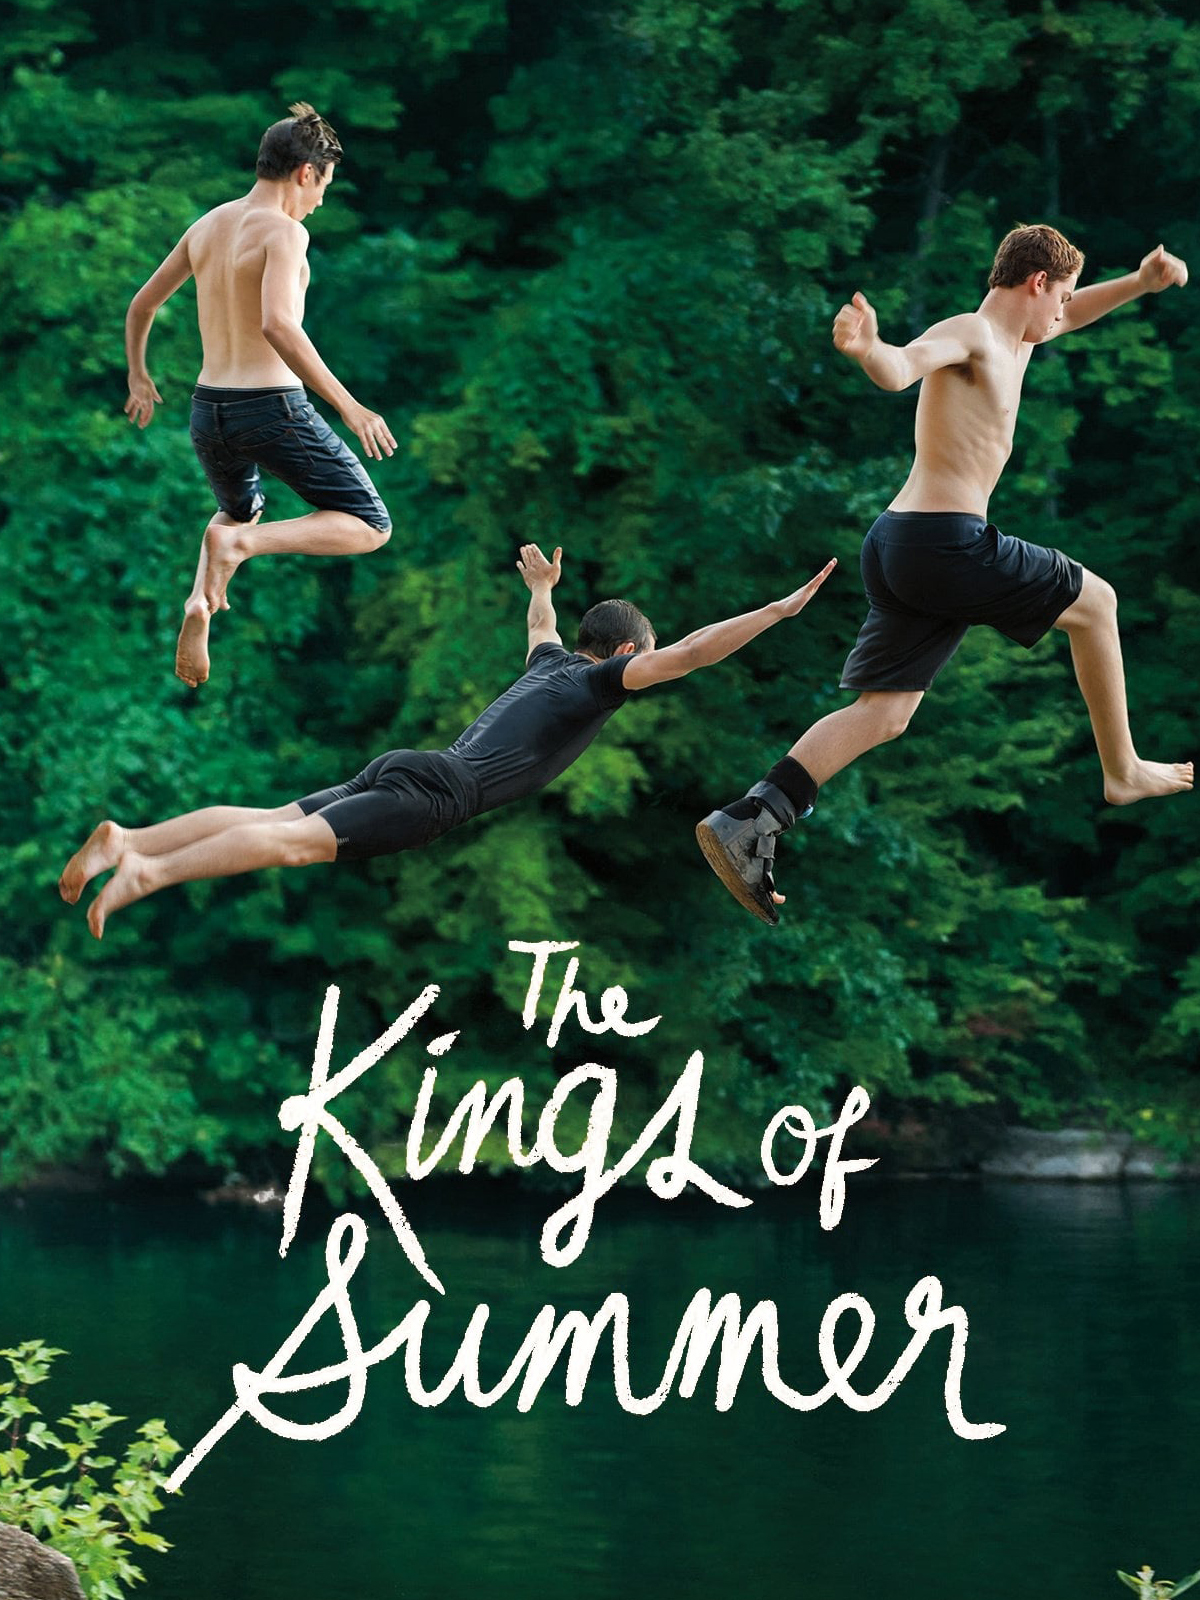 bethany schofield recommends kings of summer torrent pic